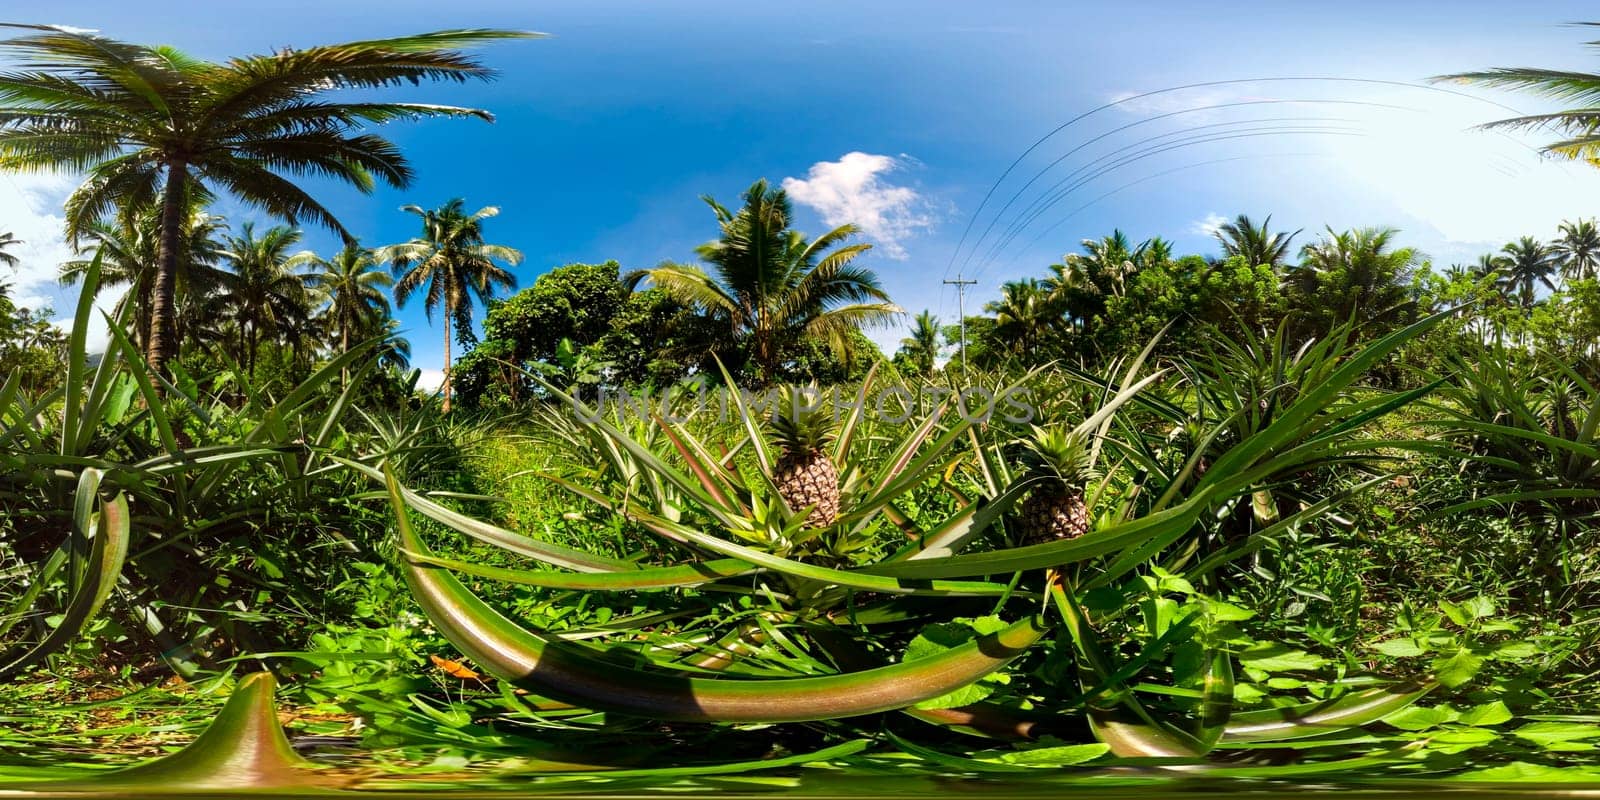 Pineapple plantation in the Philippines. VR 360. by Alexpunker